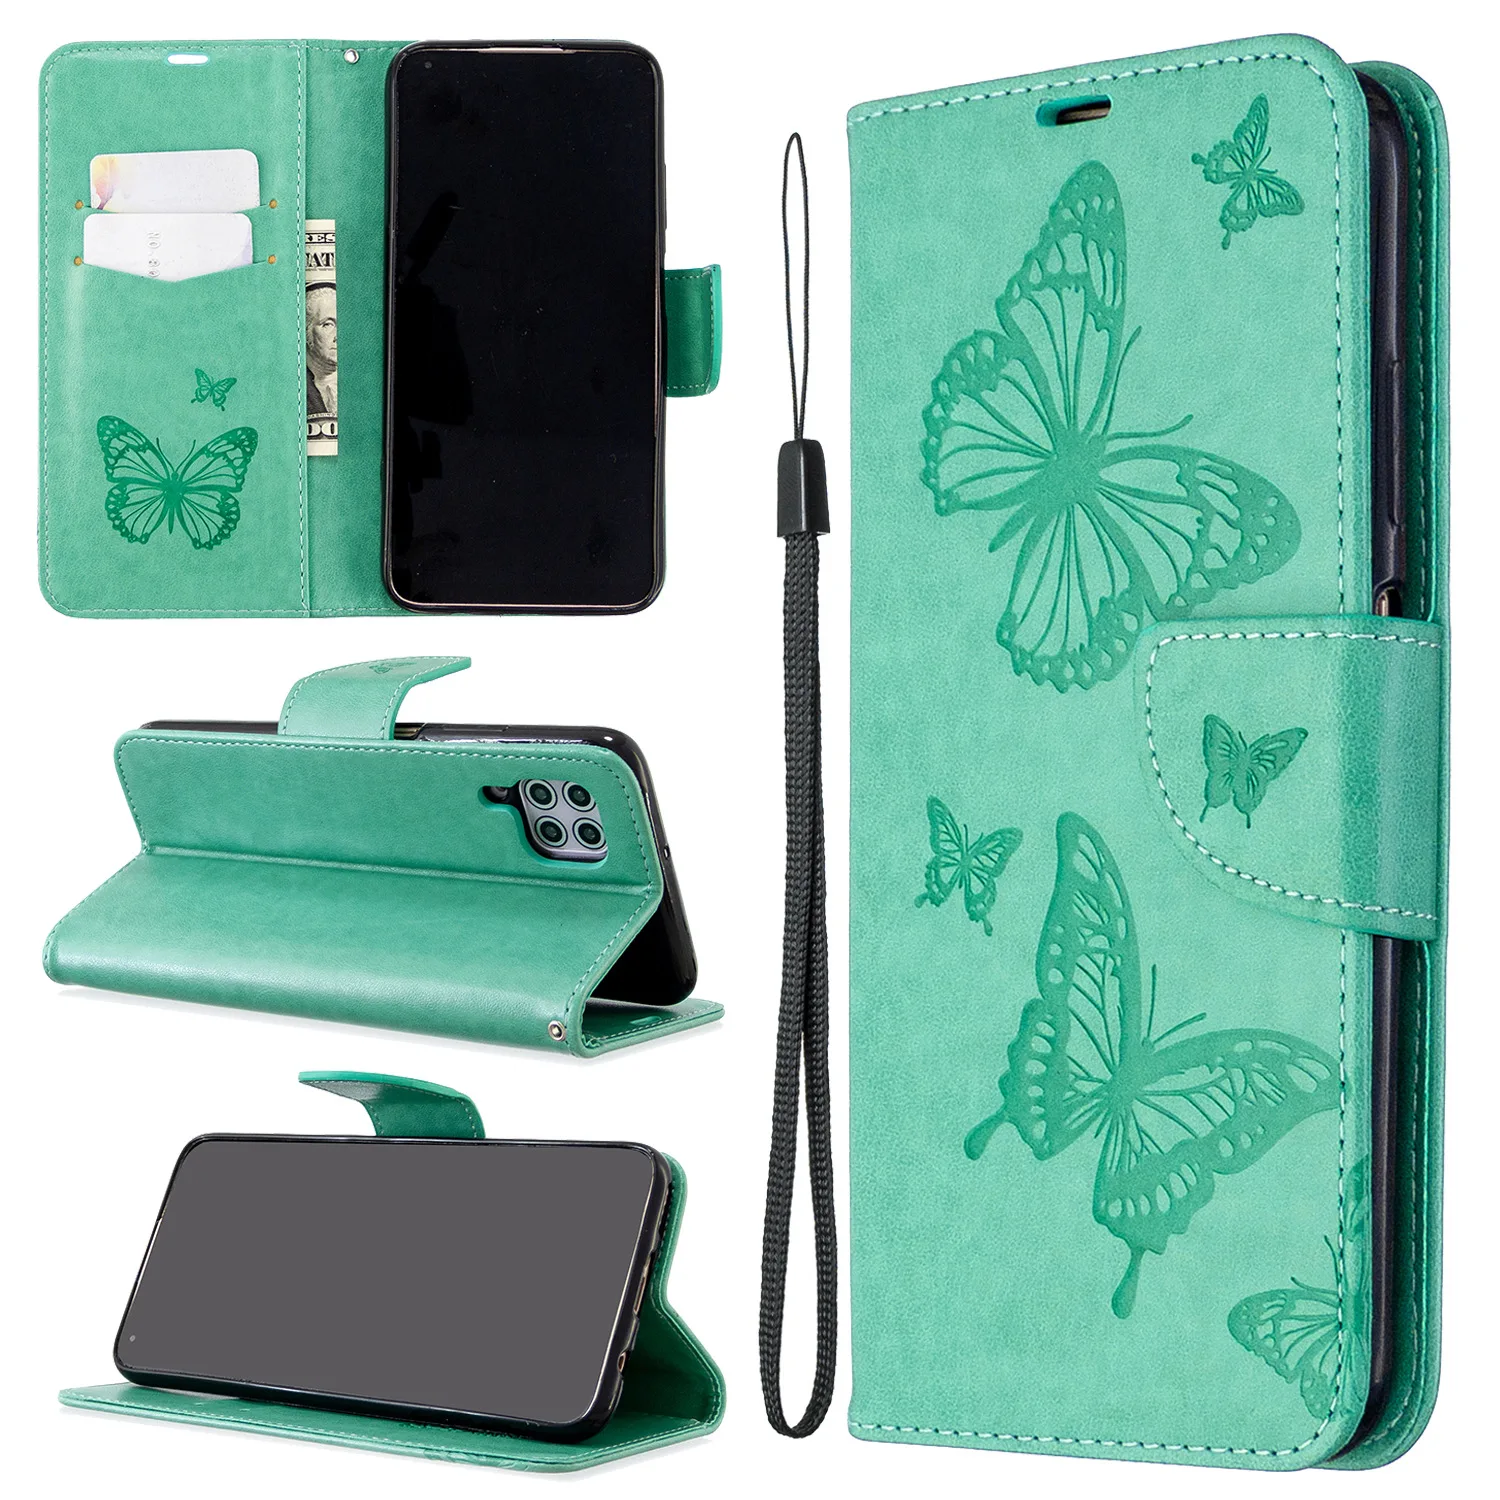 Laudtec Butterfly Design PU Phone Case Hot Stamping Stamp Cell Phone Cover for Huawei and iPhone Wallet Mobile Phone Cases